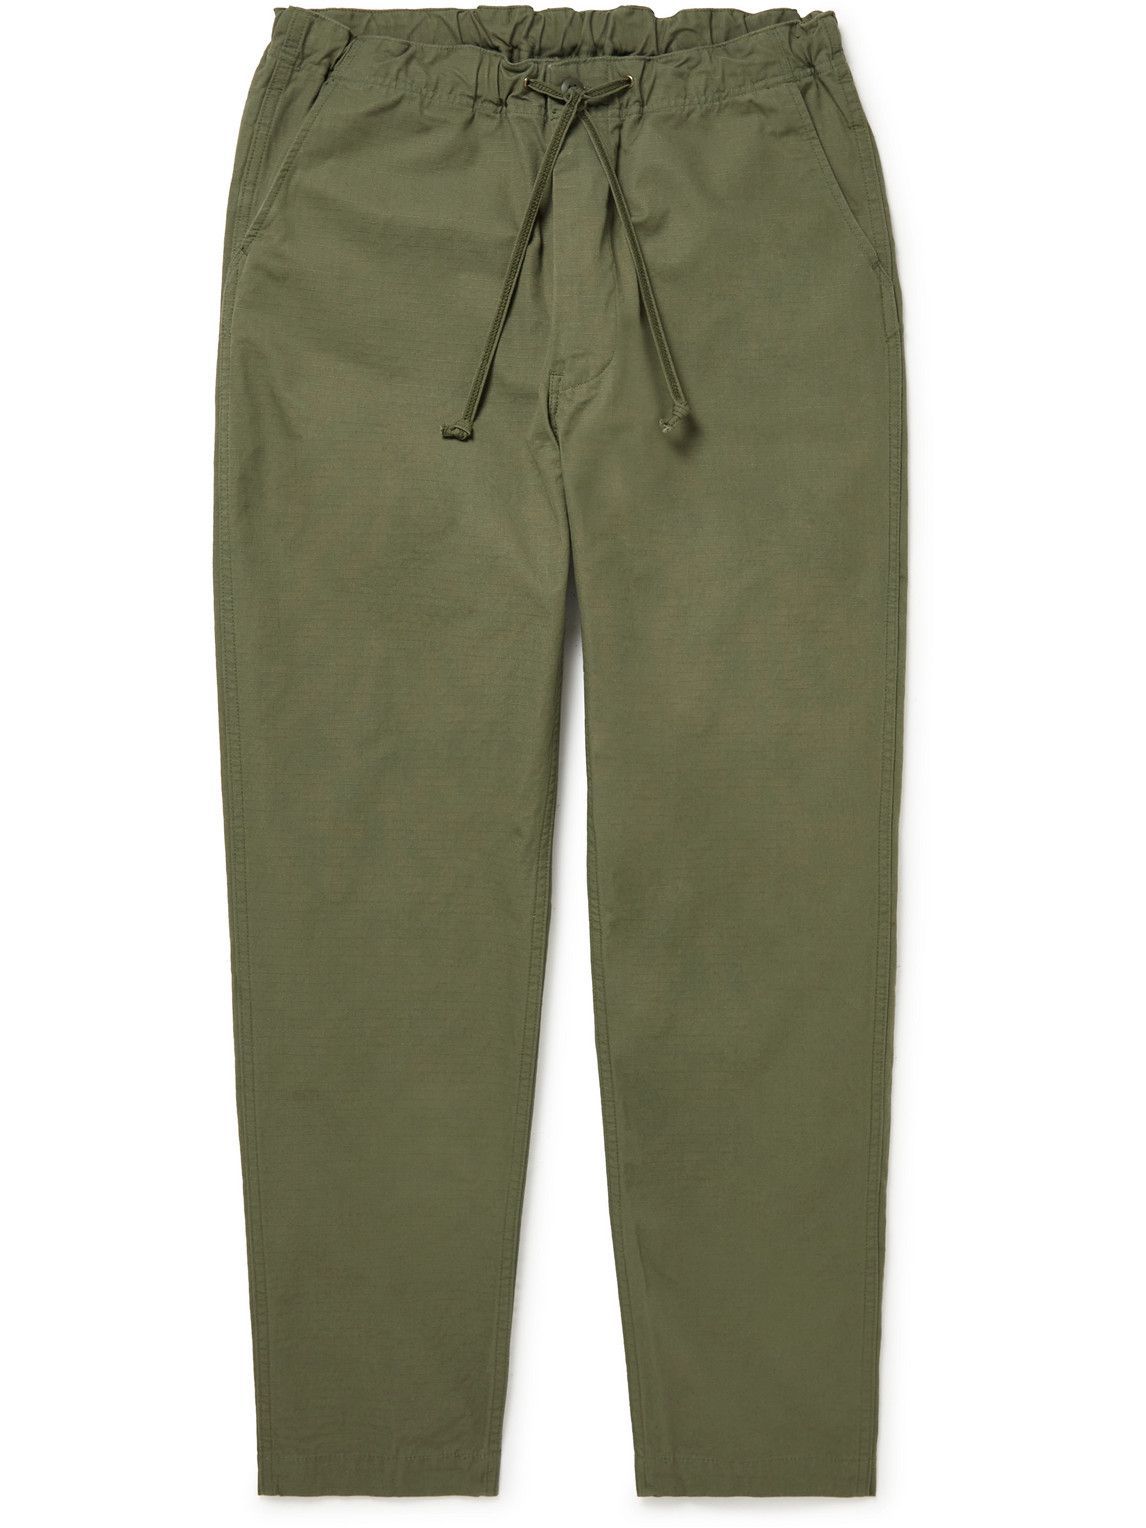 OrSlow - New Yorker Slim-Fit Tapered Cotton-Ripstop Drawstring Trousers ...